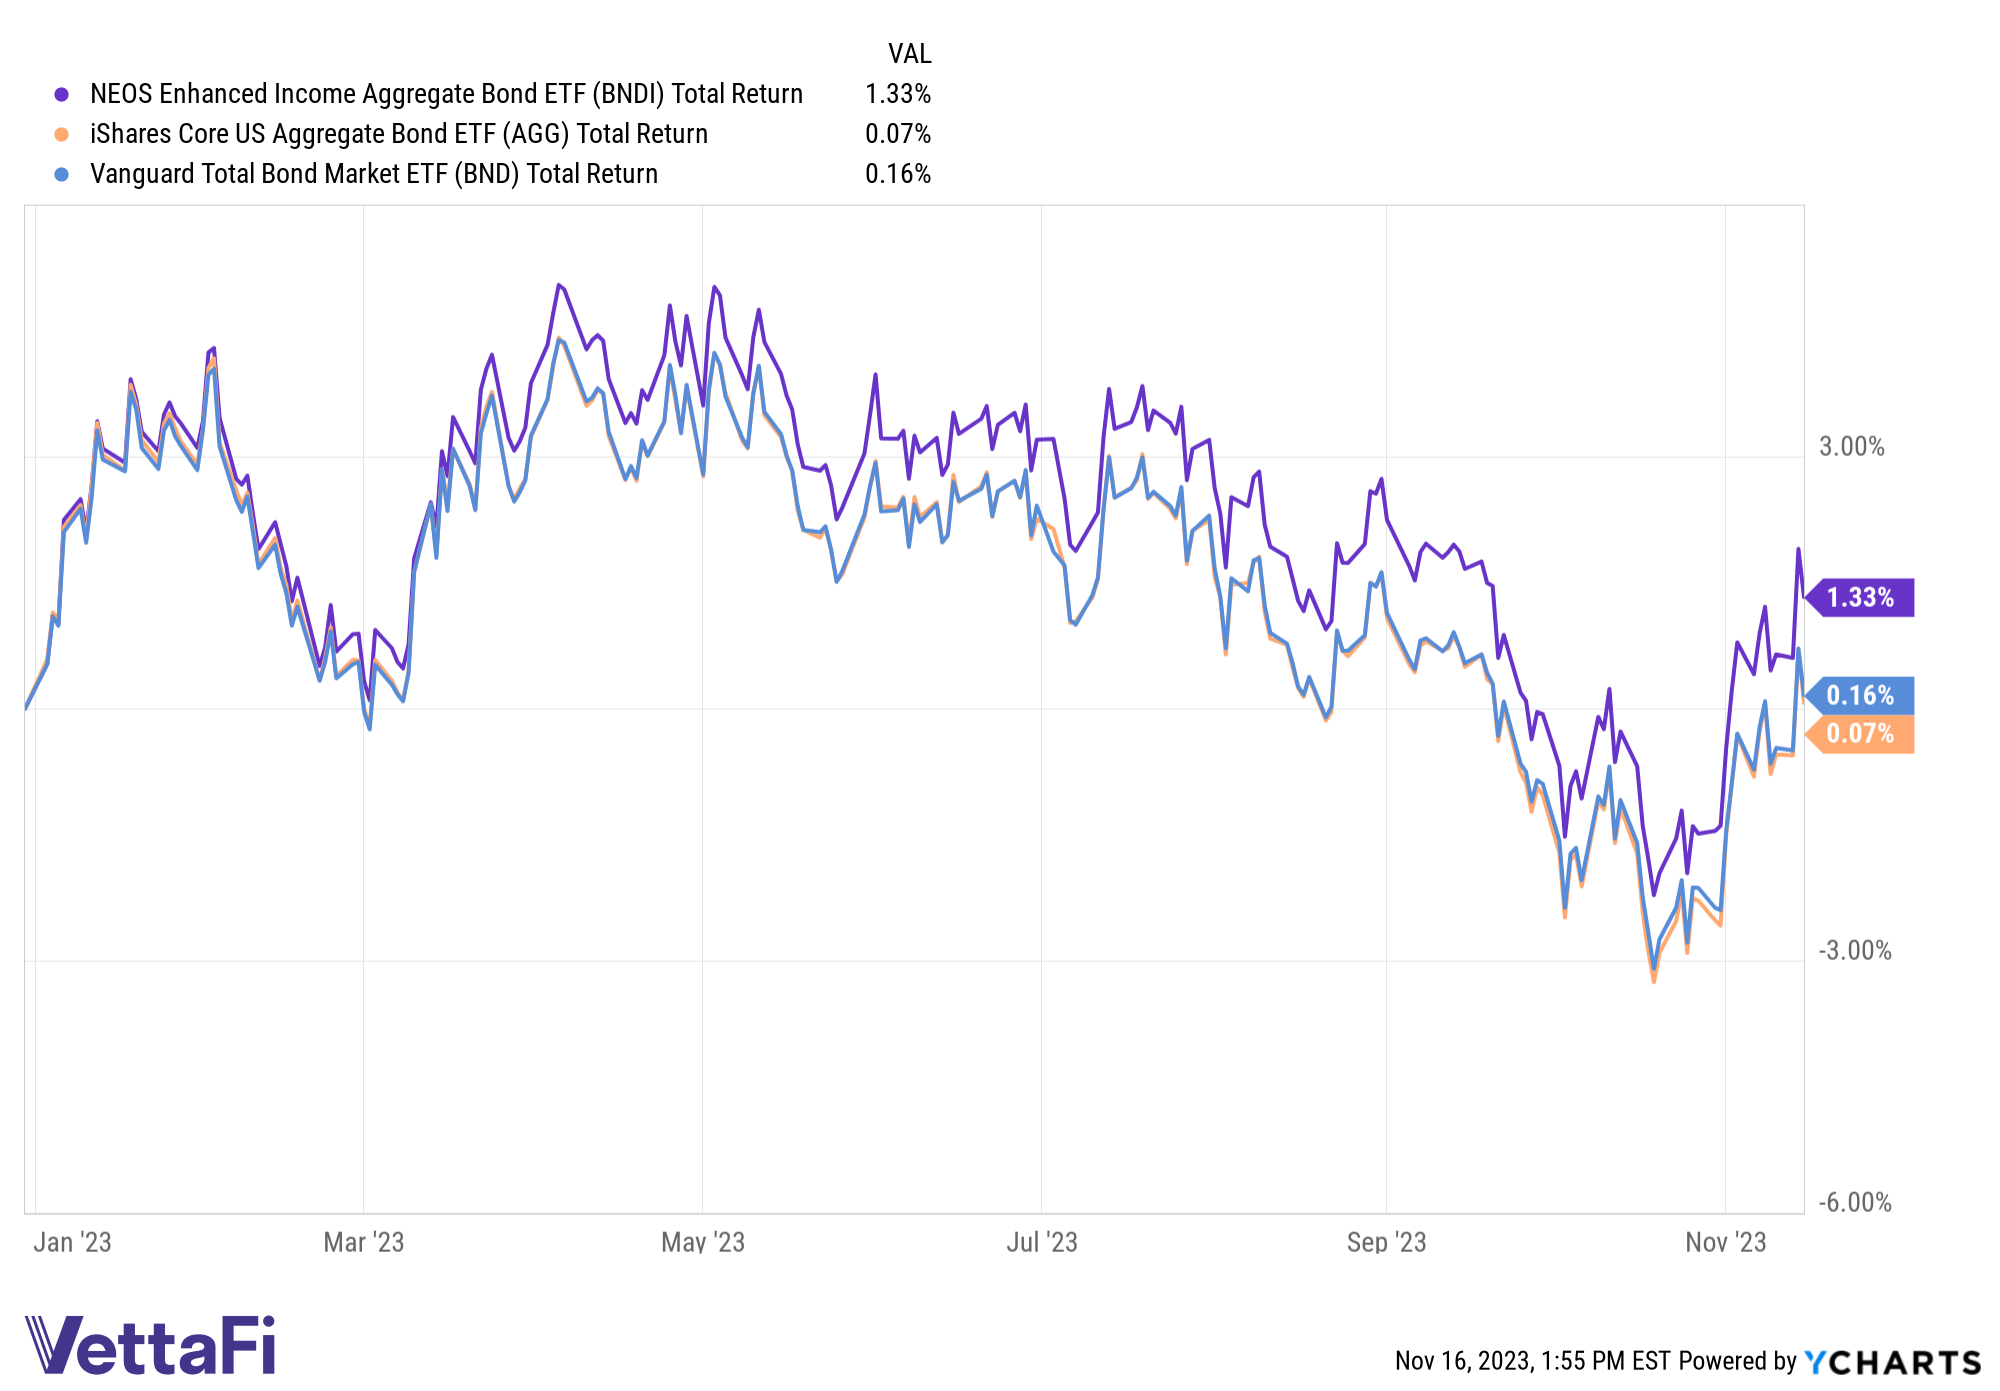 Total return chart of BNDI compared to AGG and BND YTD. BNDI leads by over a full percentage point.